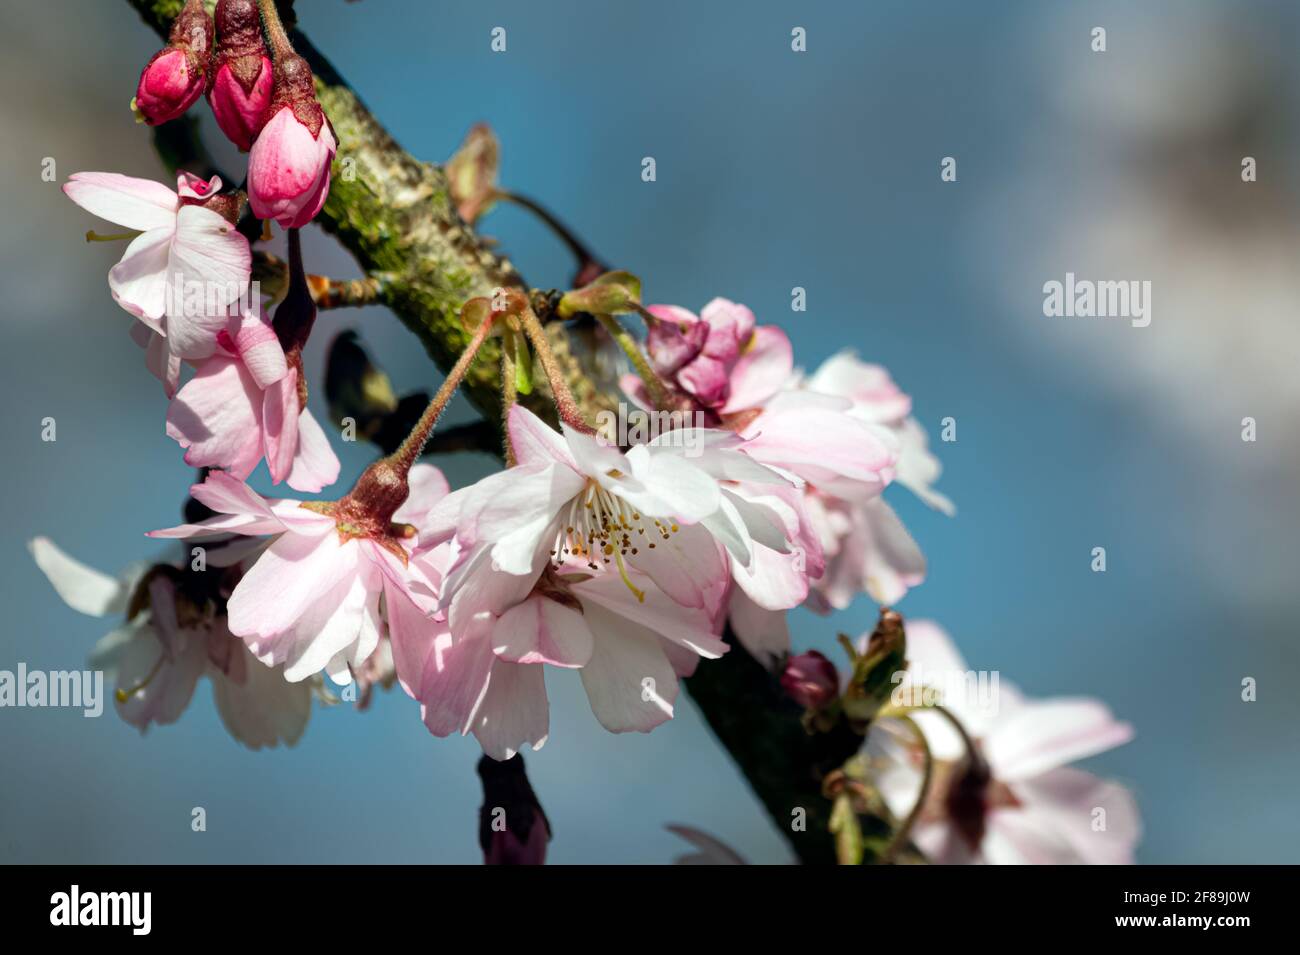 Pink ornamental cherry tree flowers in spring, against a blue sky, close up Stock Photo